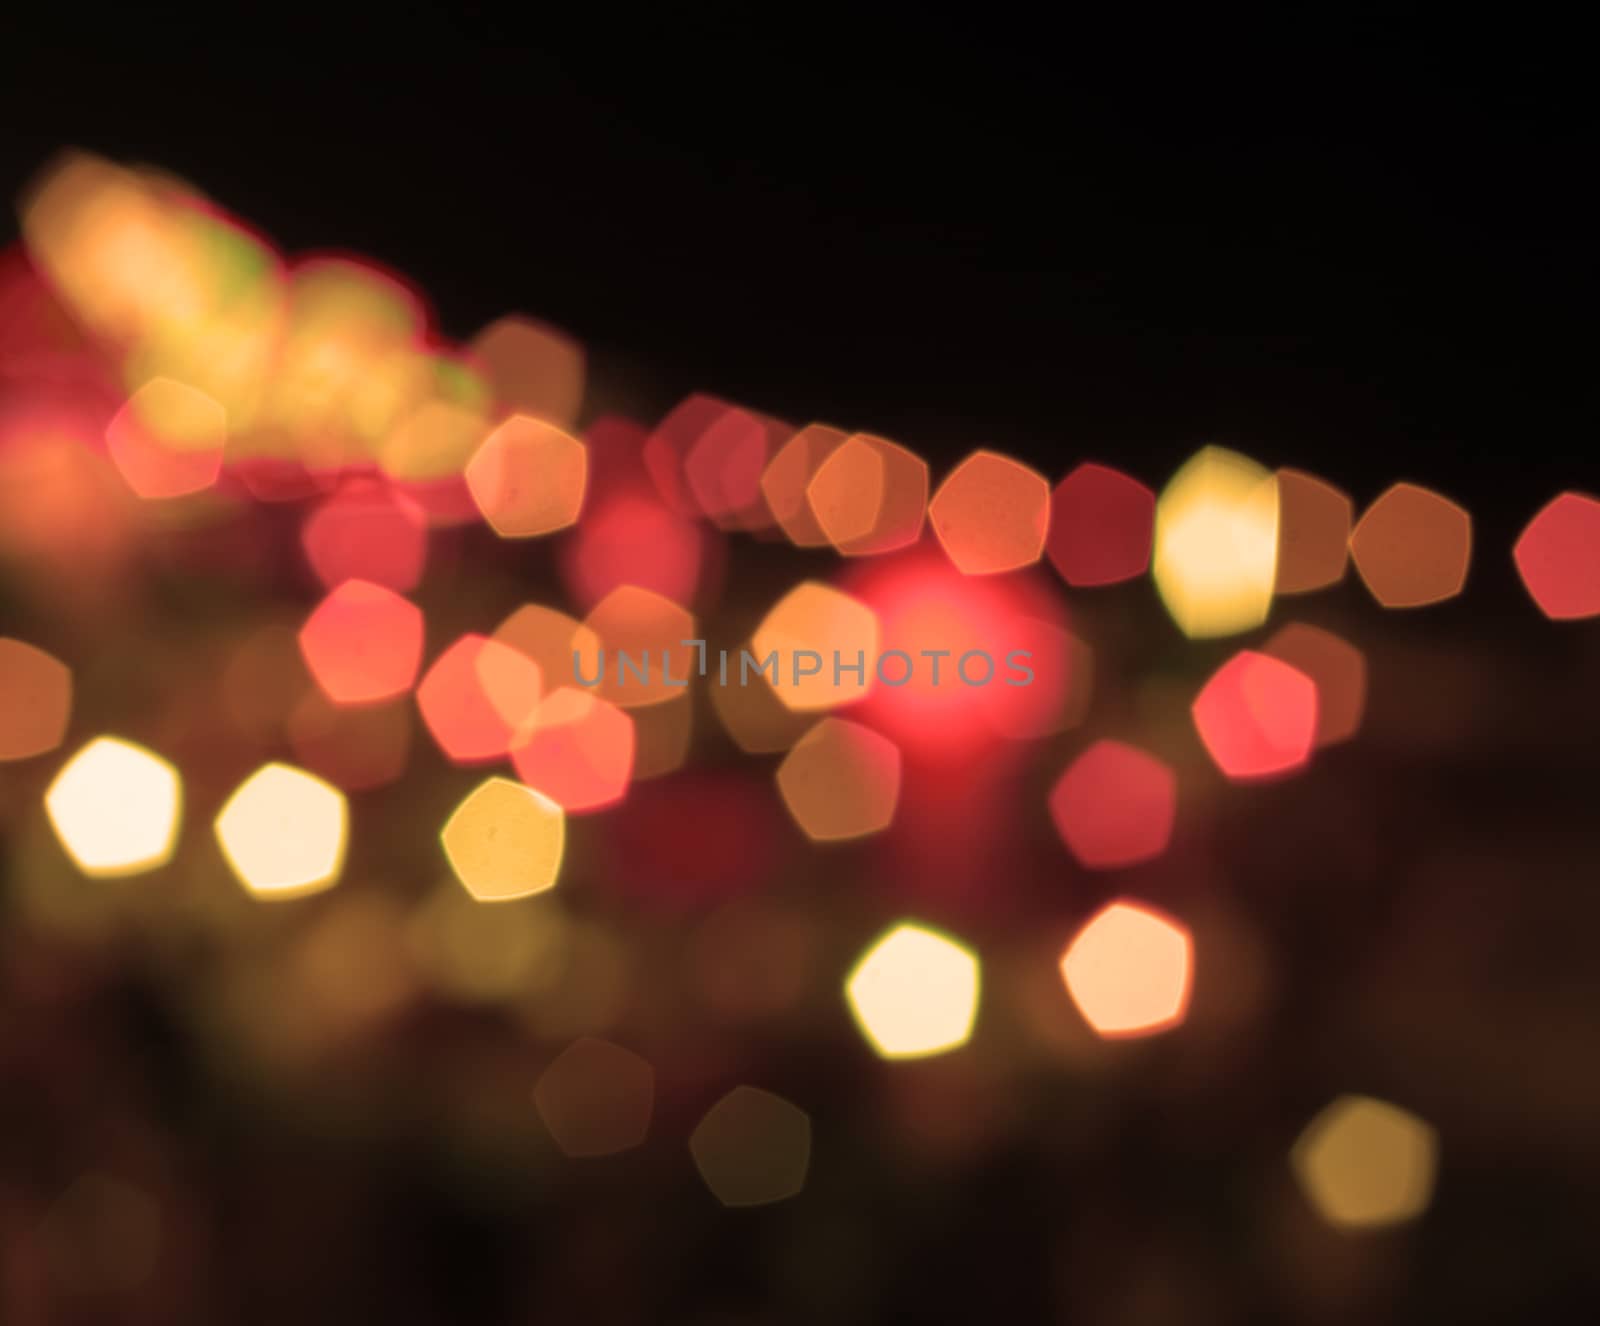 Abstract blurred night lights with vintage filter by punsayaporn